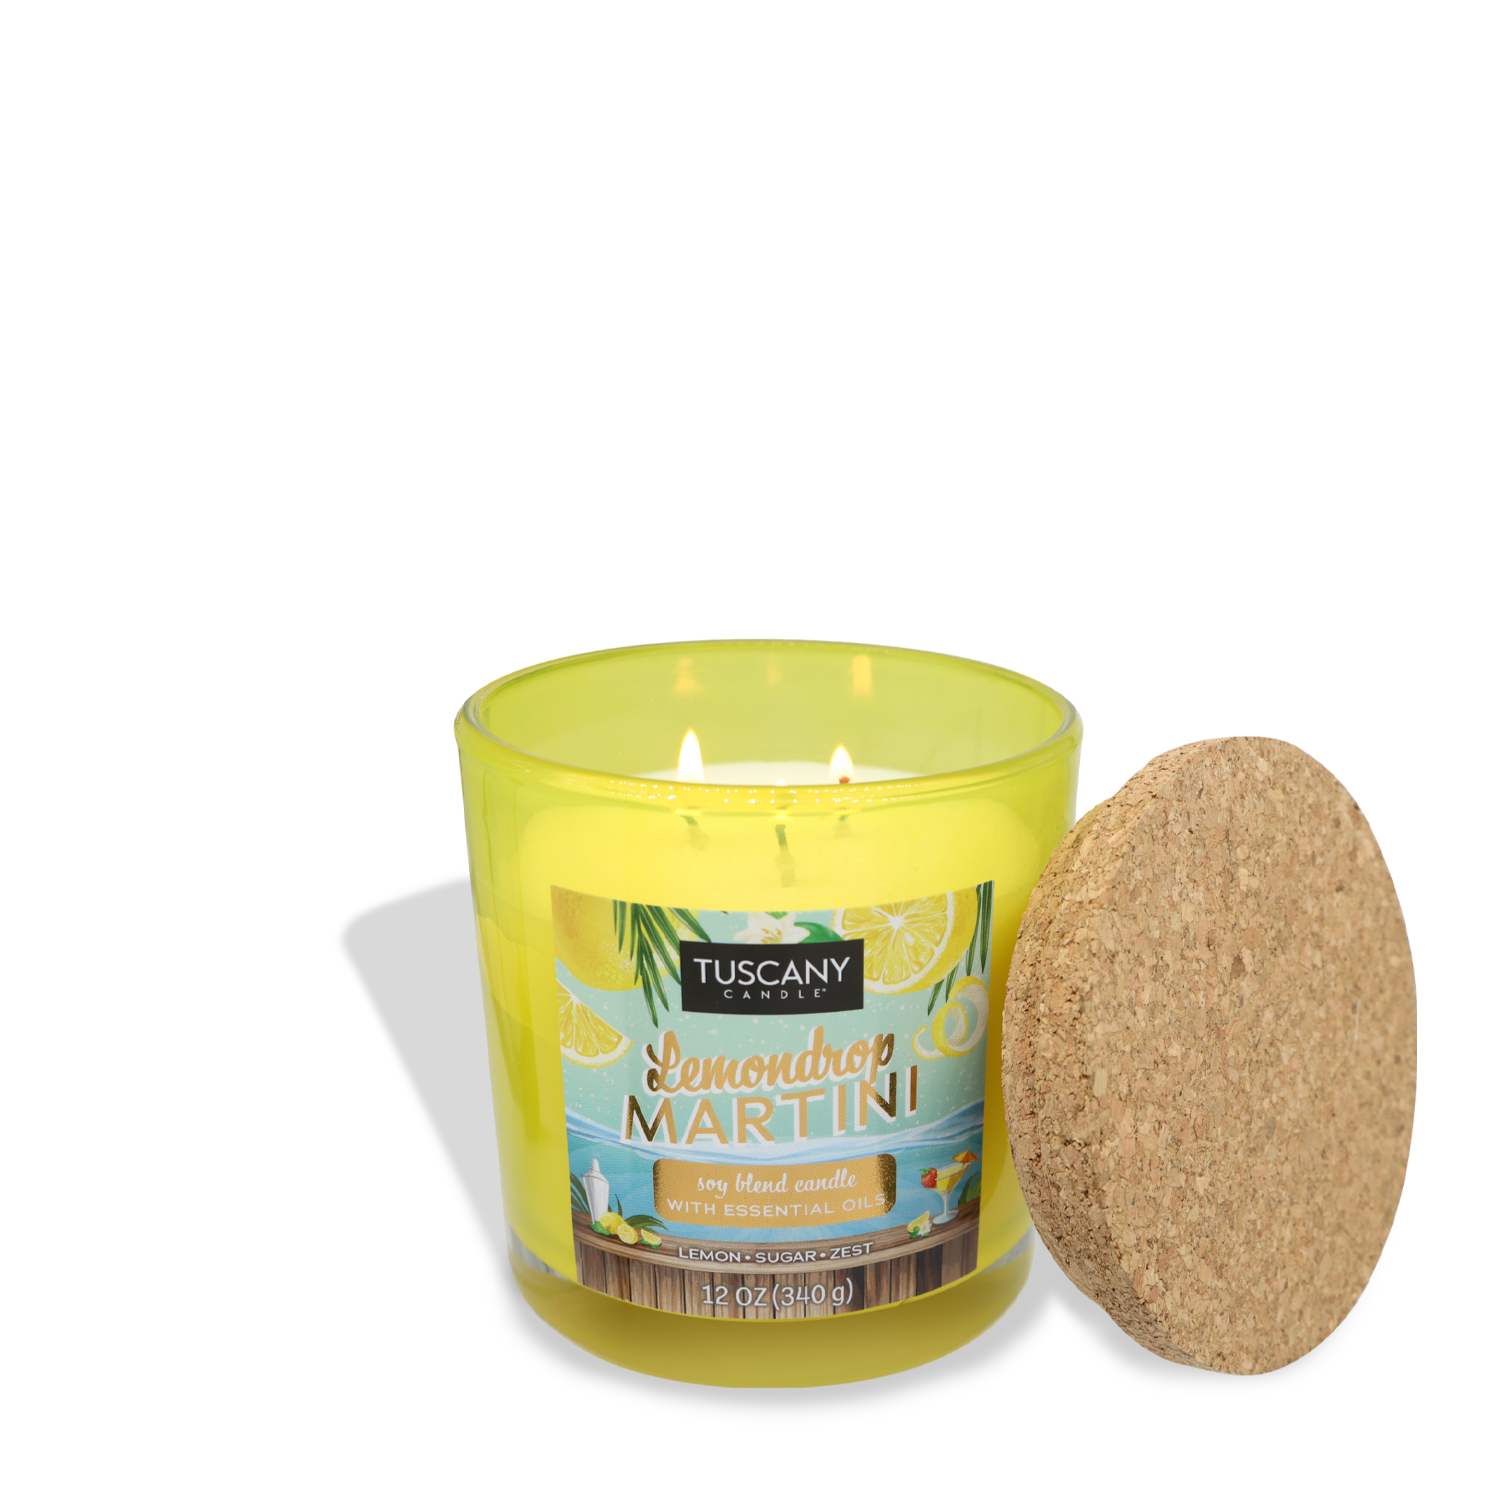 A yellow candle in a glass container labeled "Lemondrop Martini (12 oz) – Sunset Beach Bar Collection" by Tuscany Candle® SEASONAL, with a cork lid placed beside it, evokes the refreshing aroma of lemon zest and sugar.